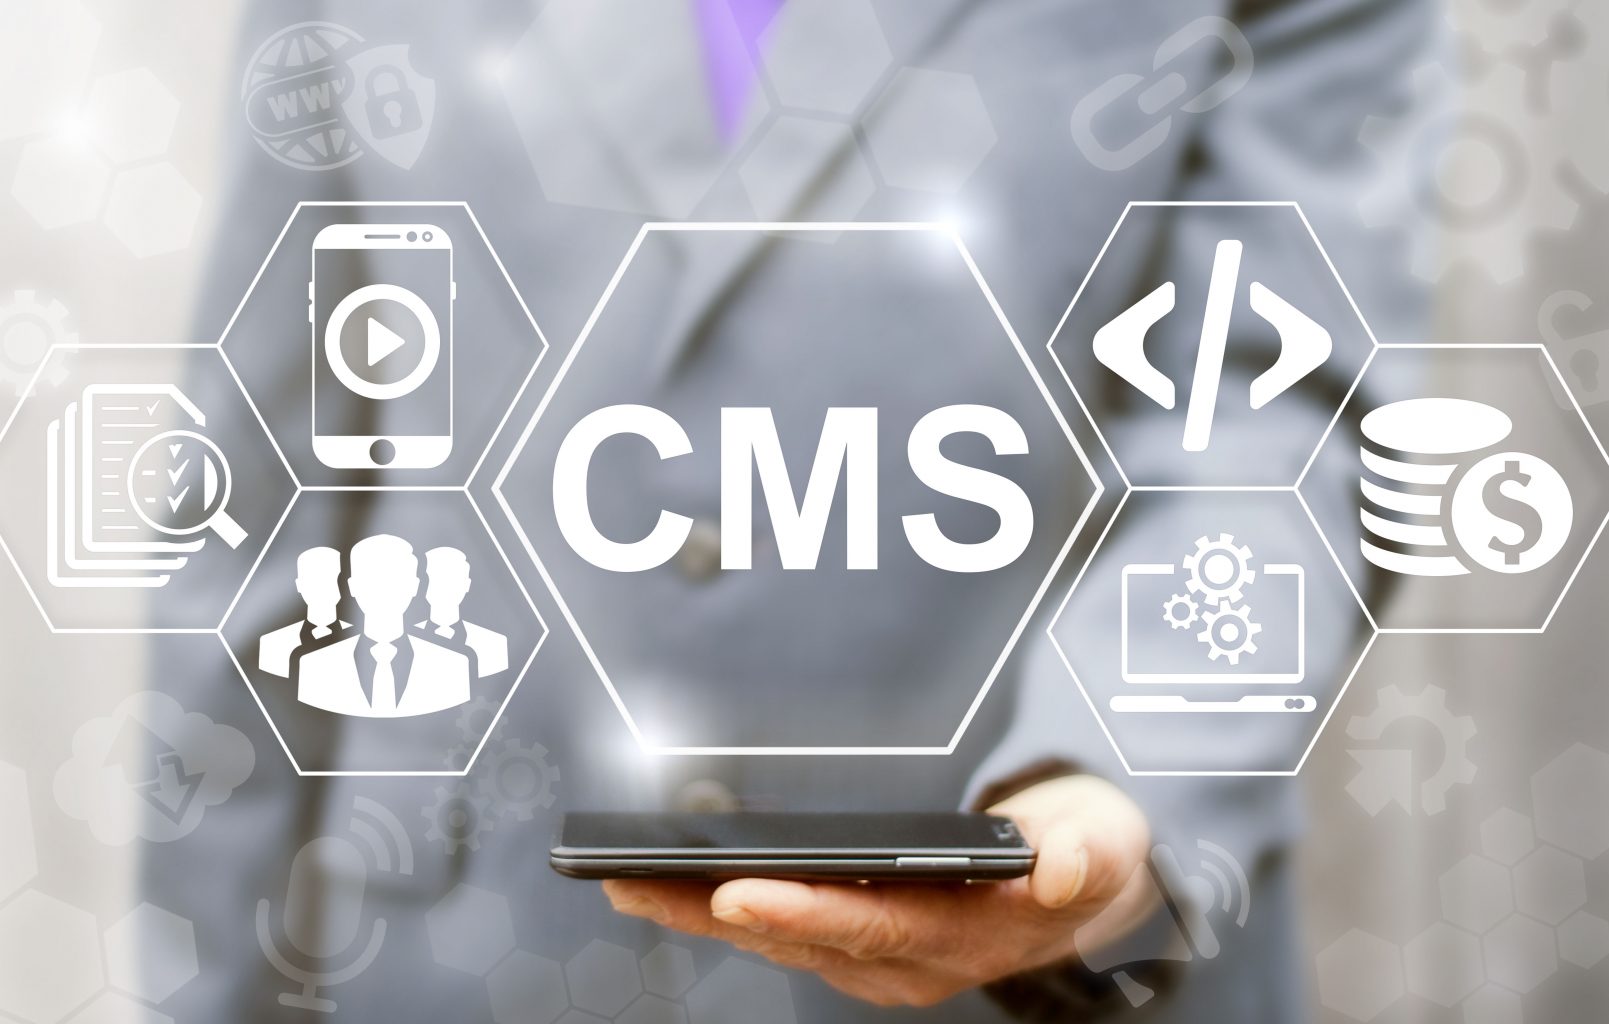 Marketing Profs enterprise SEO considerations for CMS migration featured image